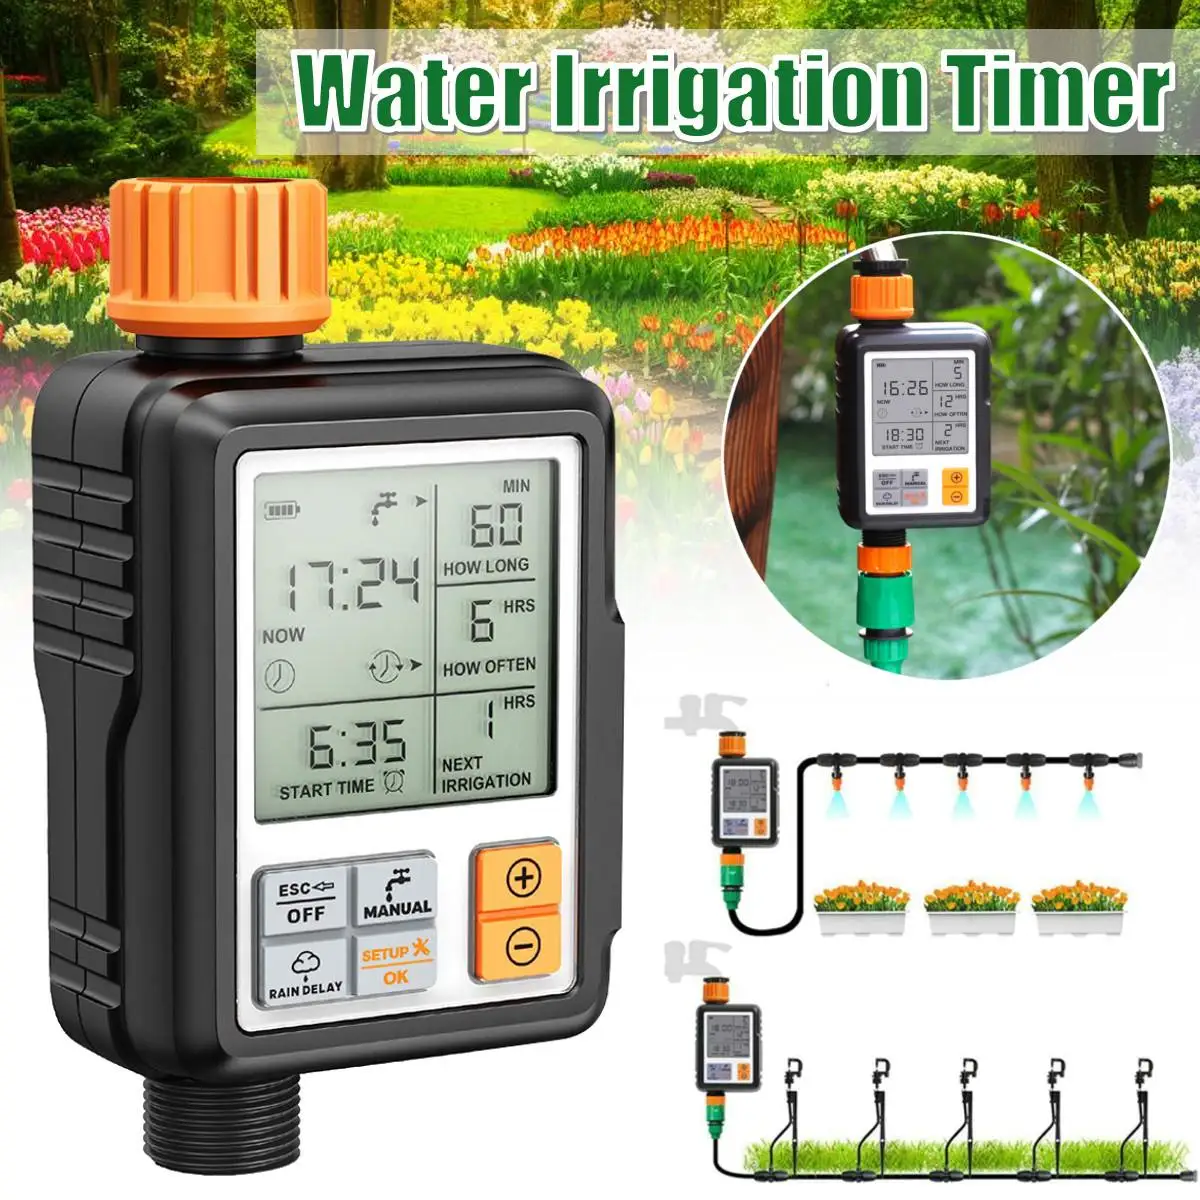 Automatic Irrigation Control Watering Device With LED Light Timepiece With LCD Display Irrigation Water Timer Watering Computer Clock Ideal For Garden Planting